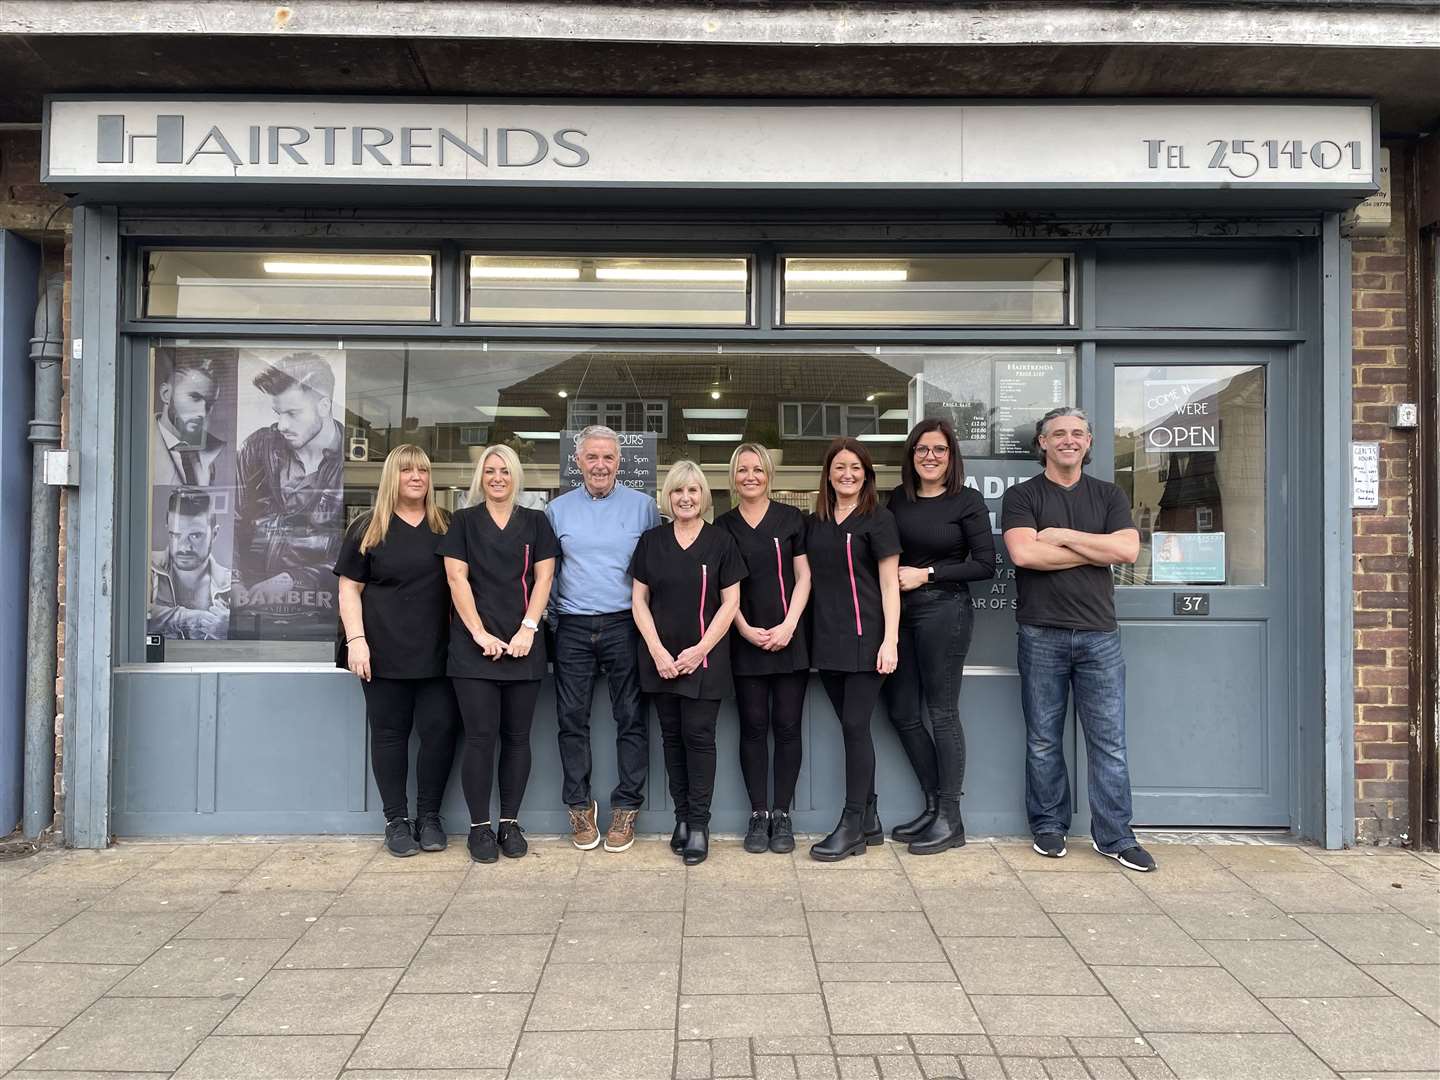 The Hairtrends team, from left: Michelle, Trudy, Phil and Janette Miller, Kelly, Rea, Vicky and Keith